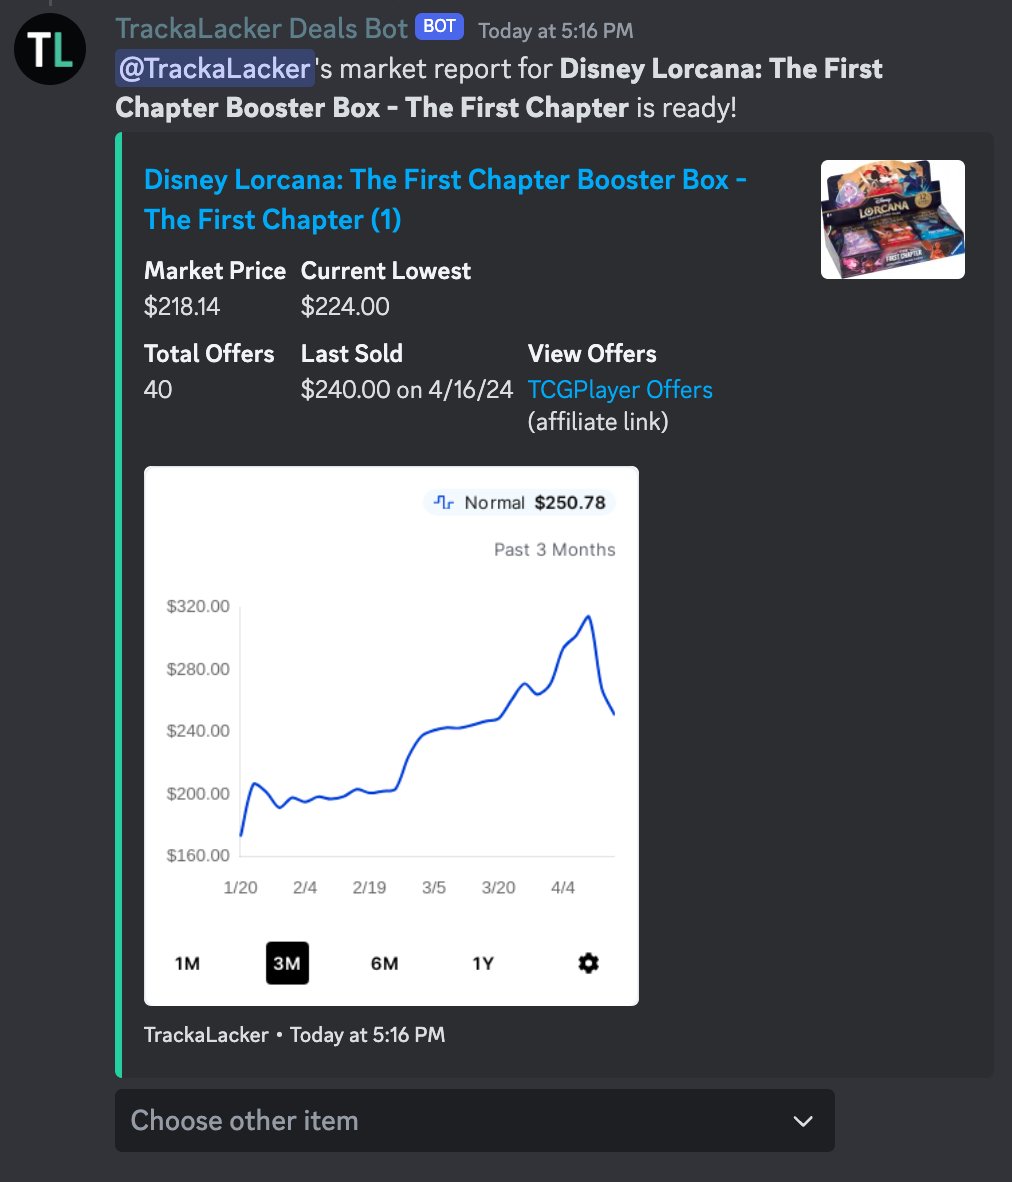 Oooo... Disney Lorcana First Chapter Booster Box prices are coming down a bit. 

View on TCGPlayer - tcgplayer.pxf.io/dadLRM #ad 

FYI - You can generate these market reports in the TrackaLacker discord with the command '/tcg-report'. 
Discord Invite - bit.ly/lcdsd